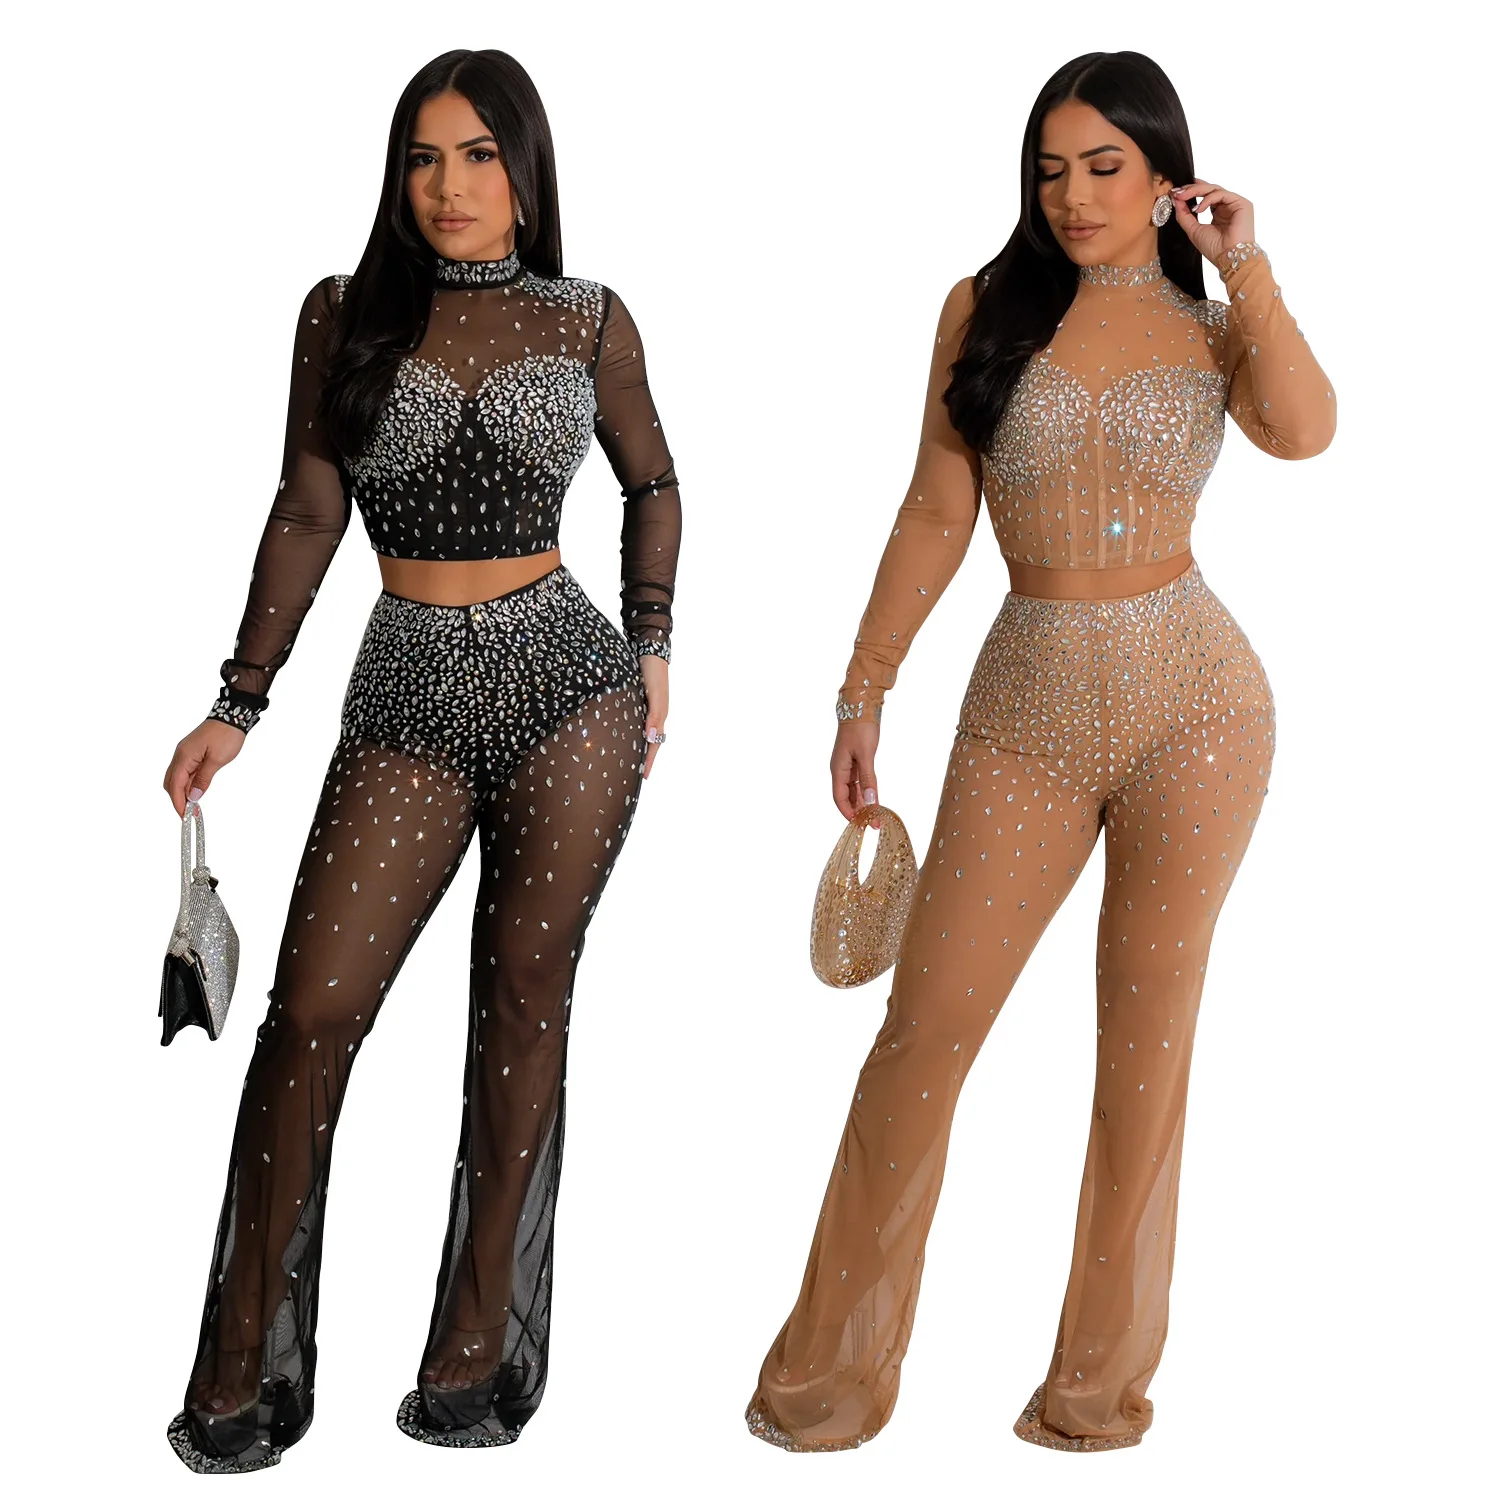 EINYOO Y2k Rhinestone Mesh See Through Long Sleeve Dresses Set for Women Birthday Sexy Night Club Party 2 Piece Sets Outfit Traf pregnant photographer shoot prop accessories maternity photography dresses sexy crystal diamonds mesh bodysuit pregnancy dress